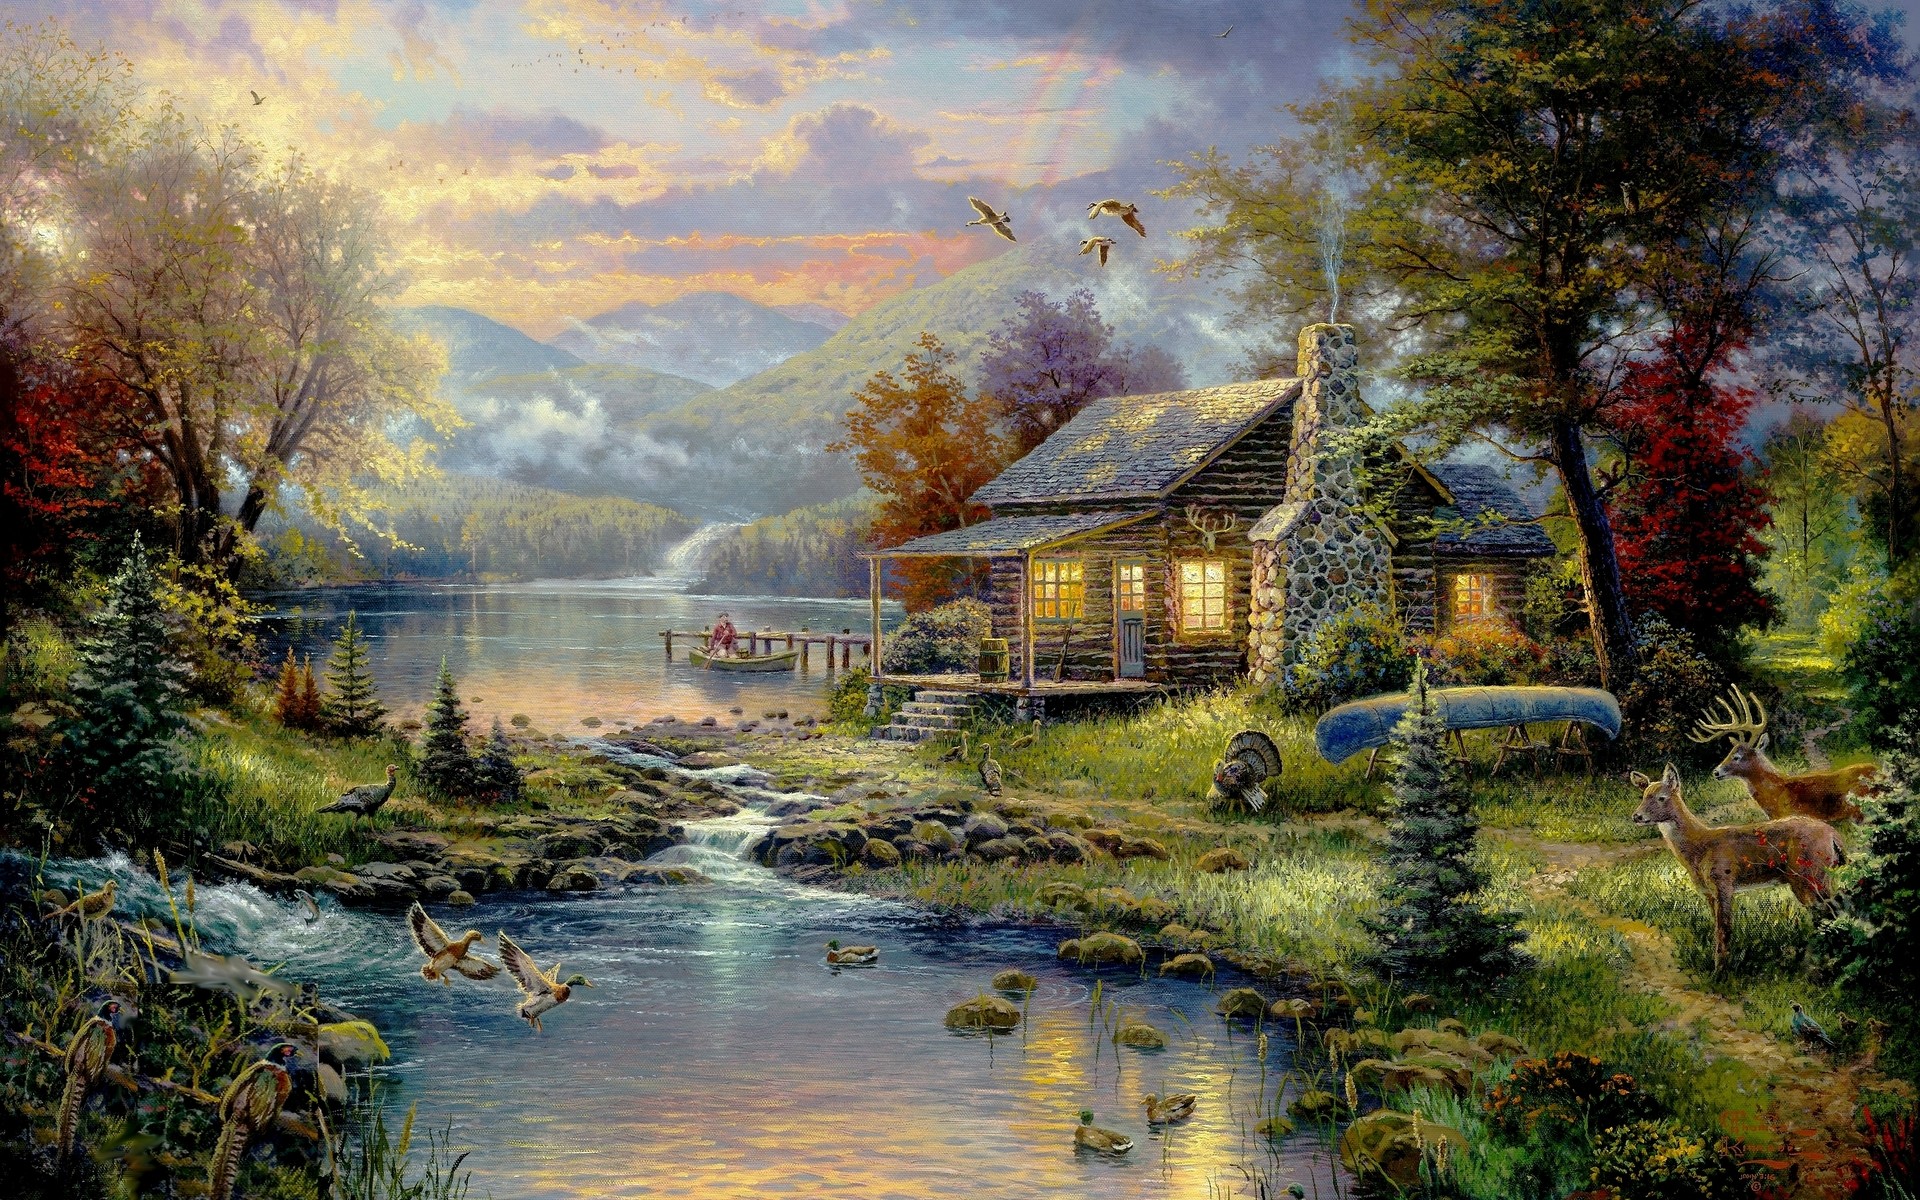 1920x1200 Can You Find The Serial Killers In These Thomas Kinkade Paintings? from  Jamie Loftus